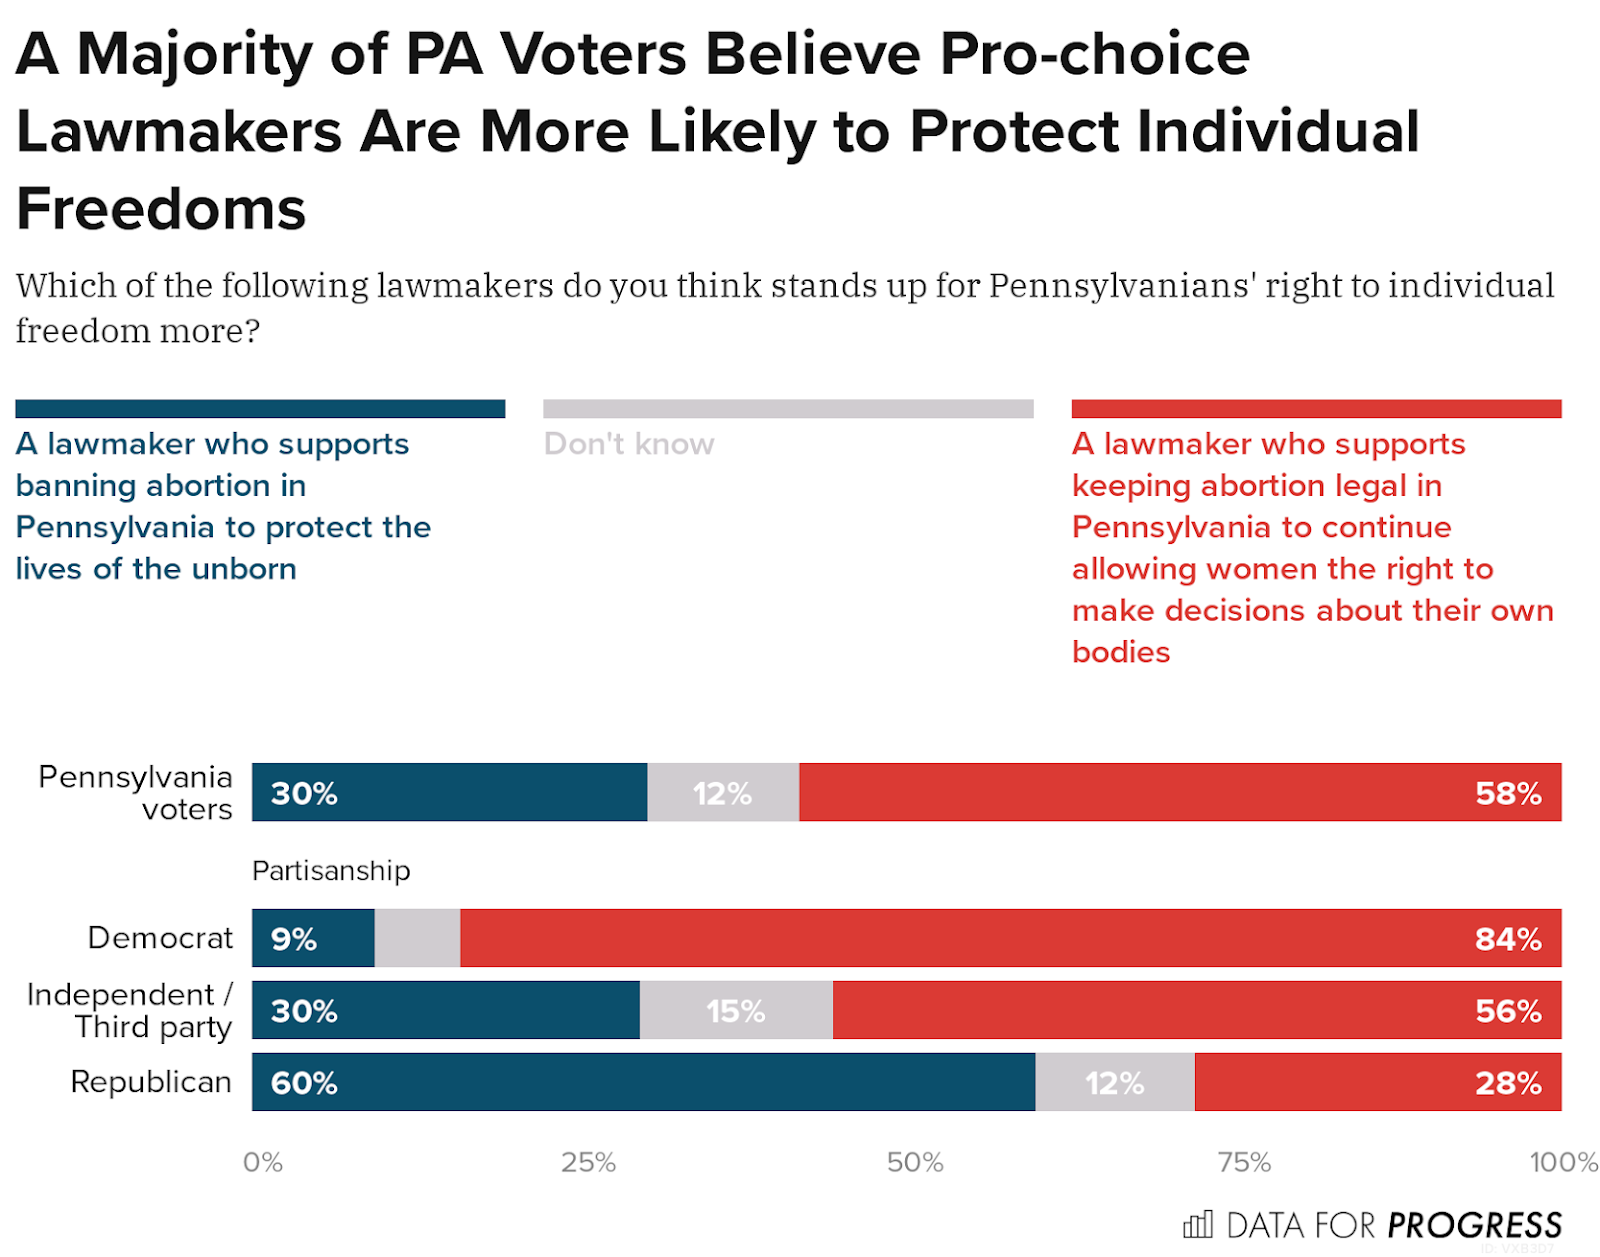 Nearly 60% of PA Voters Agree That Pro-Choice Politicians Are Standing Up For More Freedoms